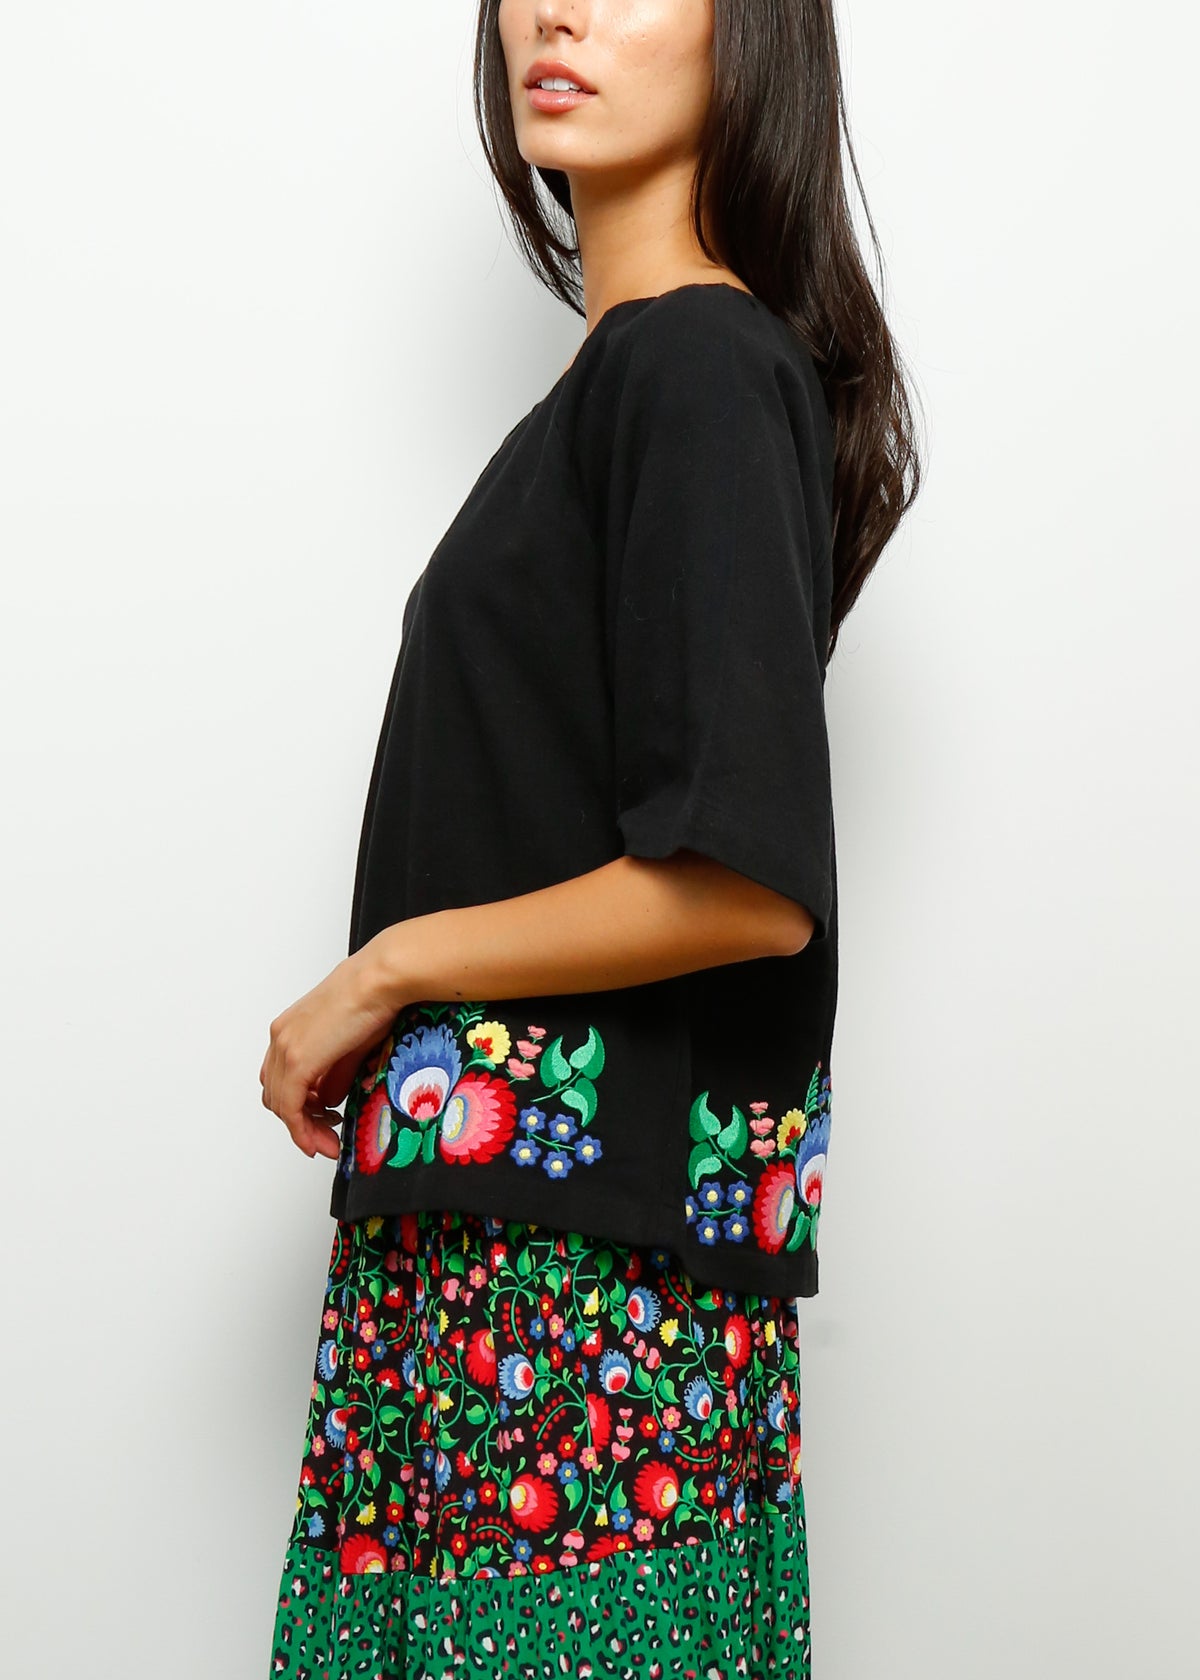 PPL Violet Top in Fire Flower Embroidery 01 Black